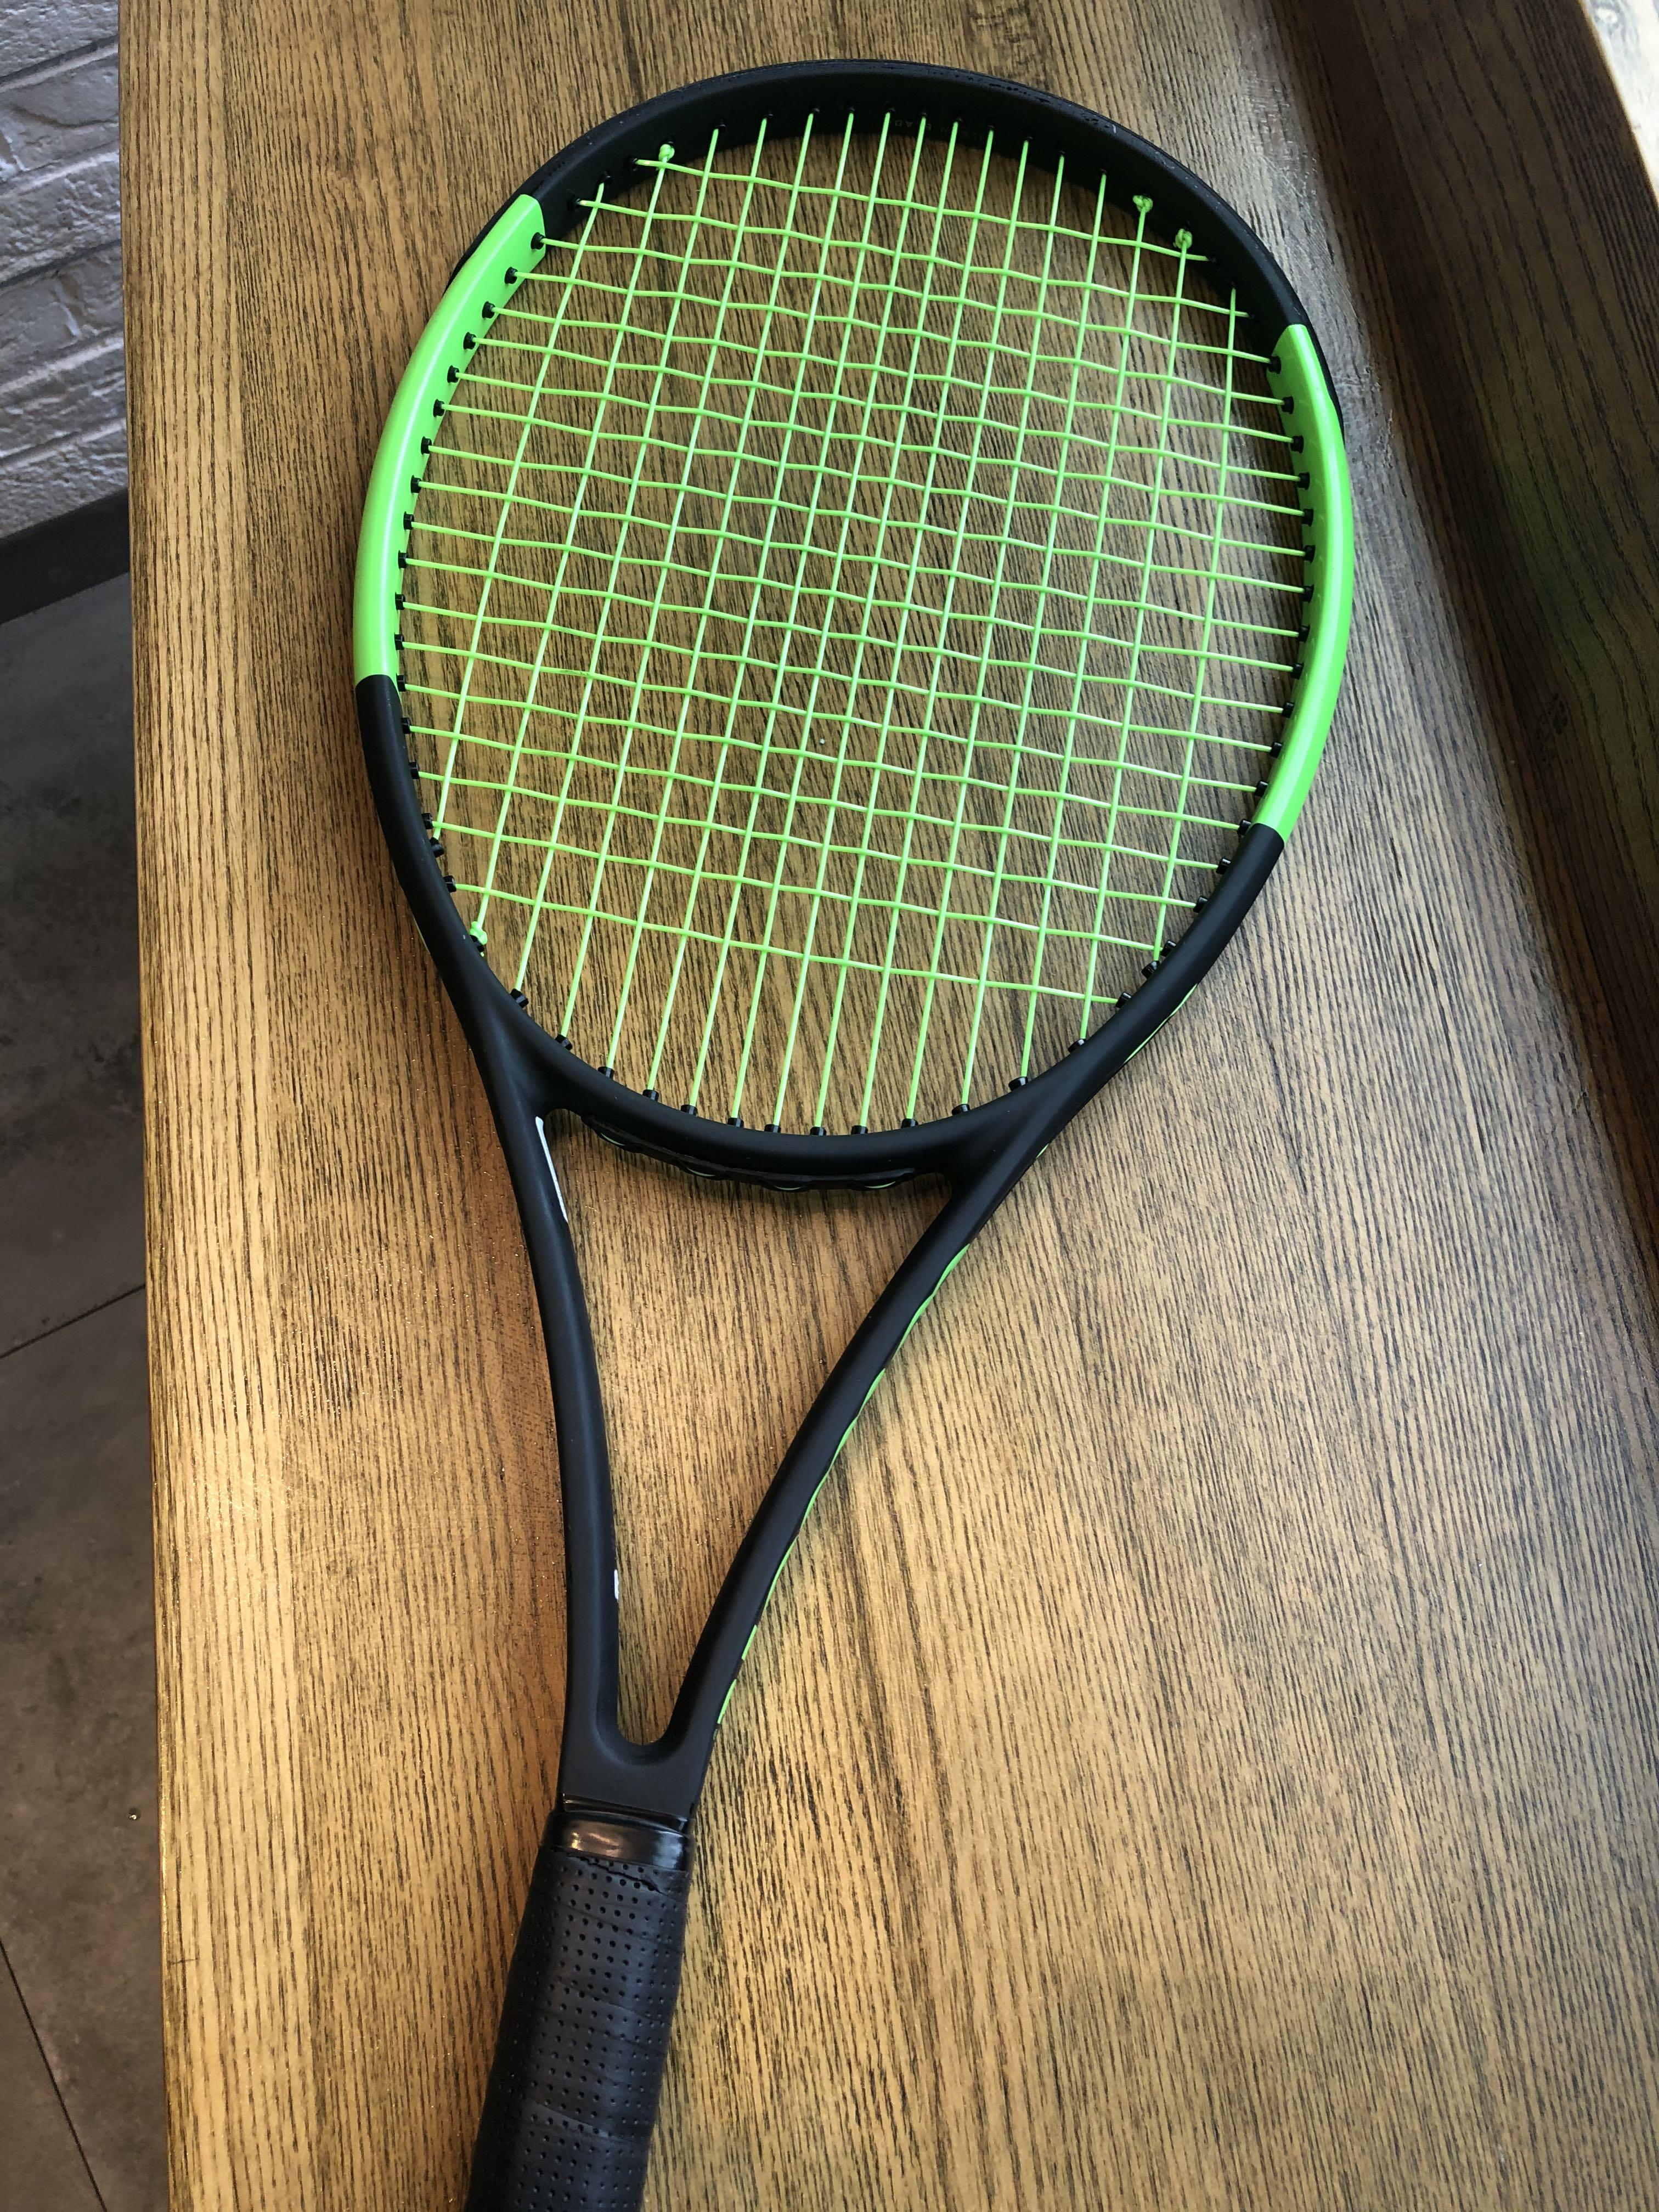 Tennis Warehouse Playtest: Solinco Hyper-G Soft! Page Talk, 48% OFF